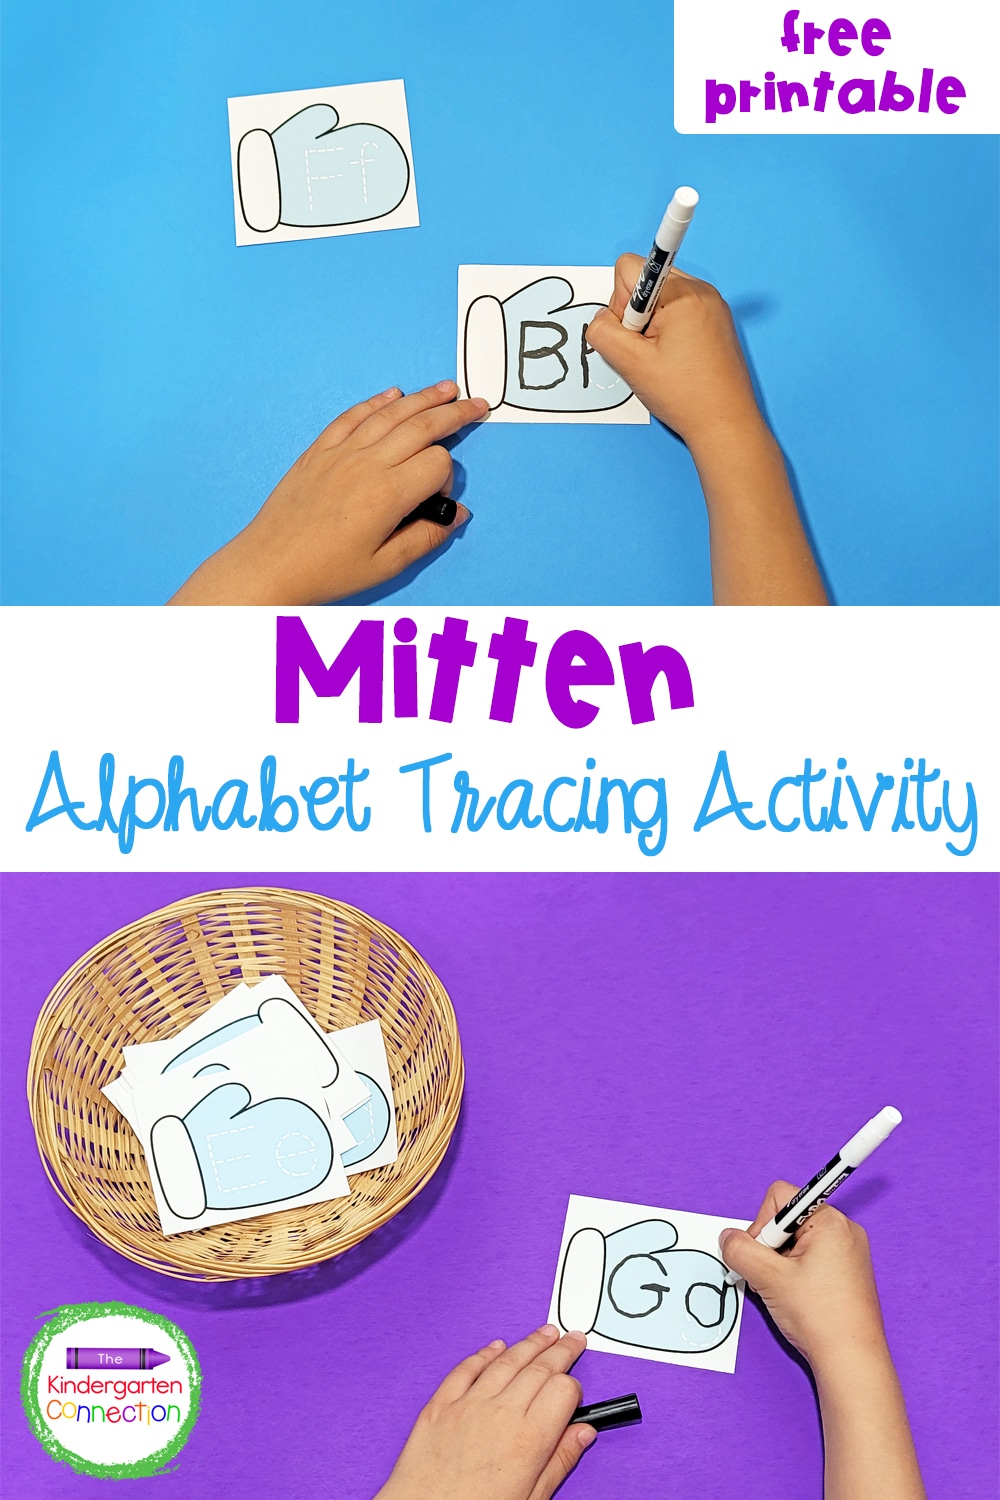 Preschoolers and Kindergarteners can practice writing and fine motor skills this winter with these free Mitten Alphabet Tracing Cards!